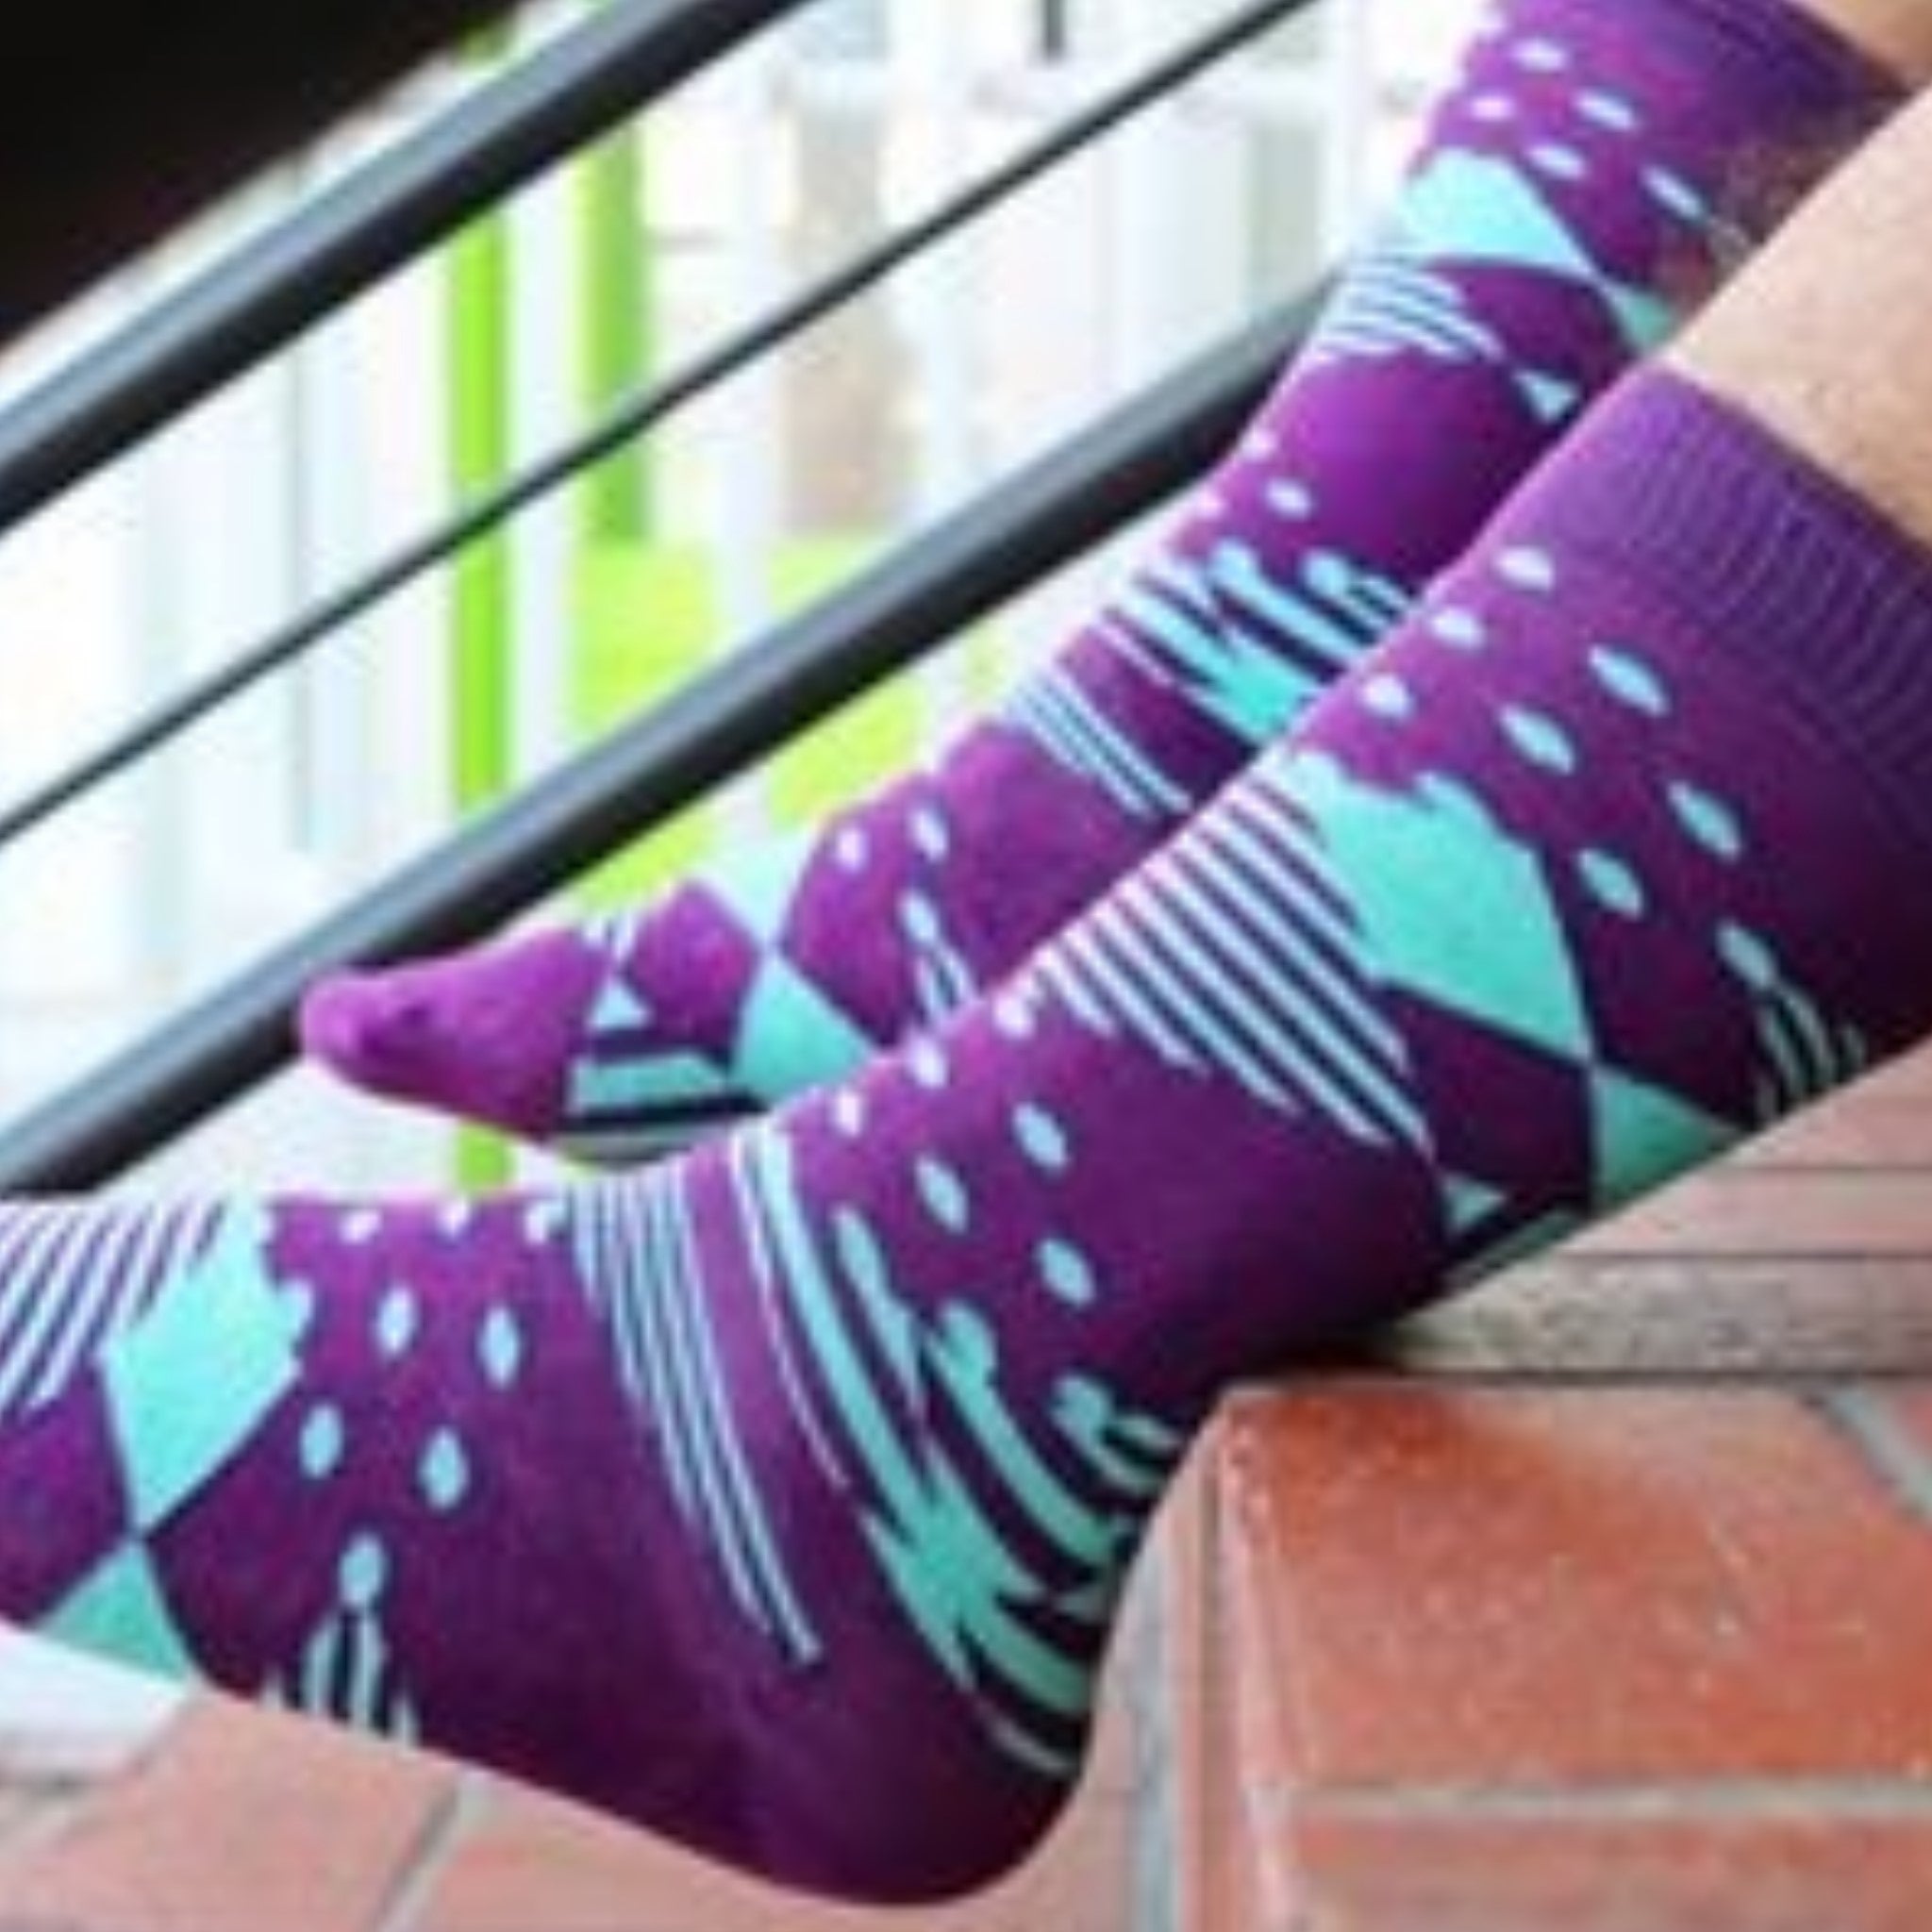 Exciting Purple and Baby Blue Patterned Socks from the Sock Panda